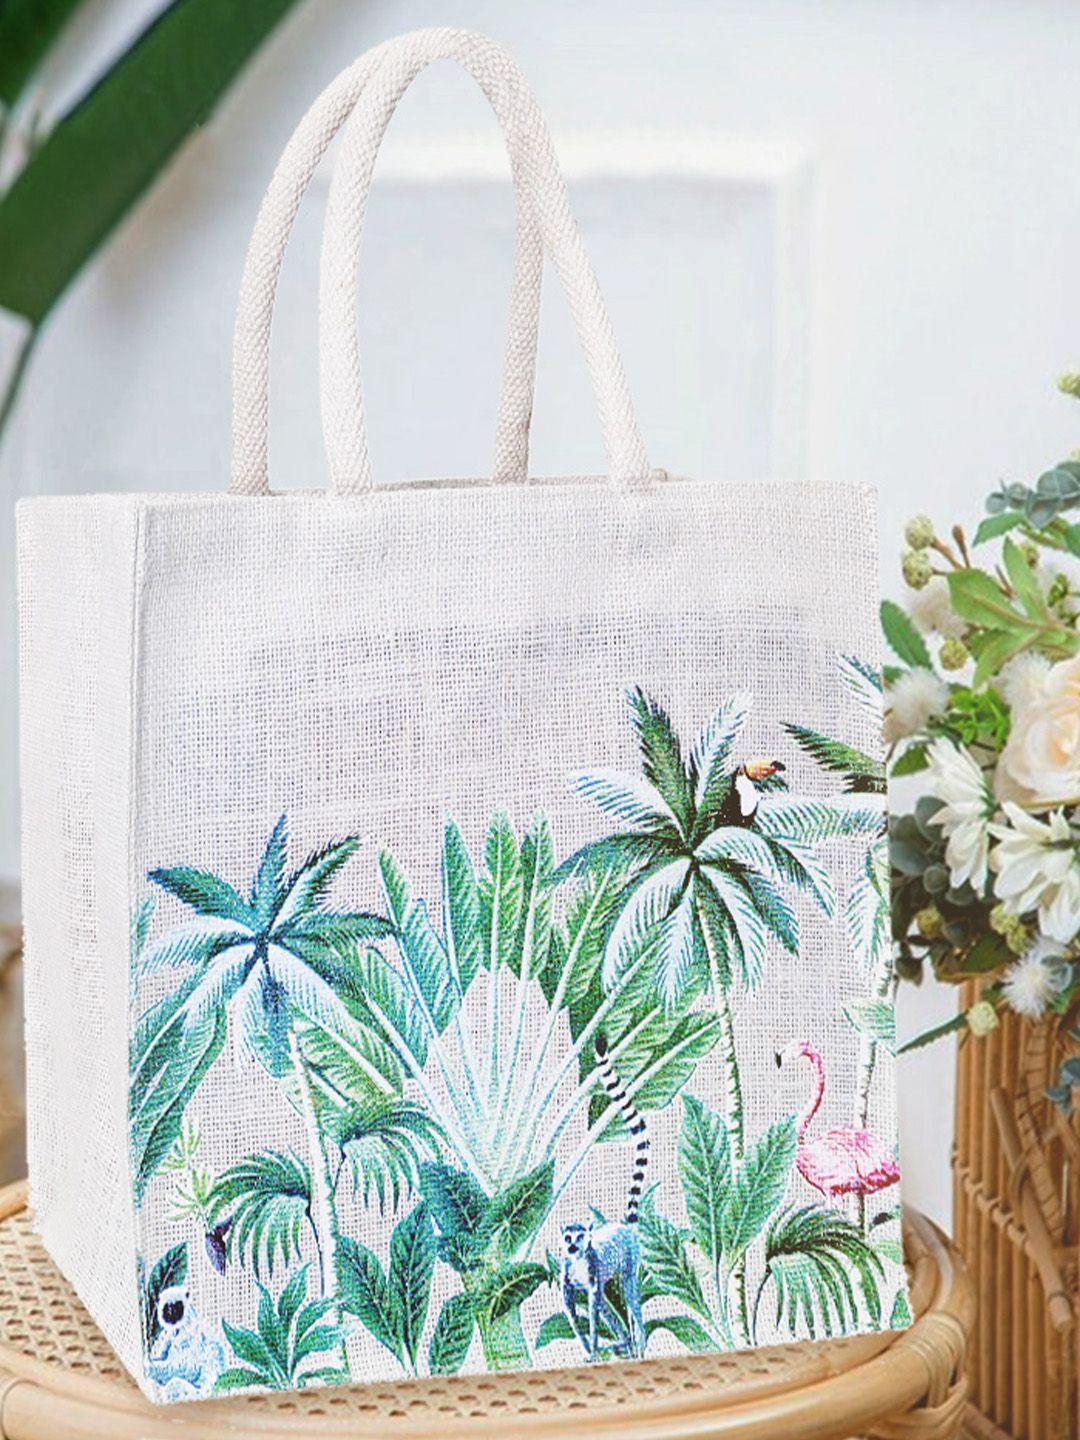 earthbags off white floral printed oversized jute tote bag